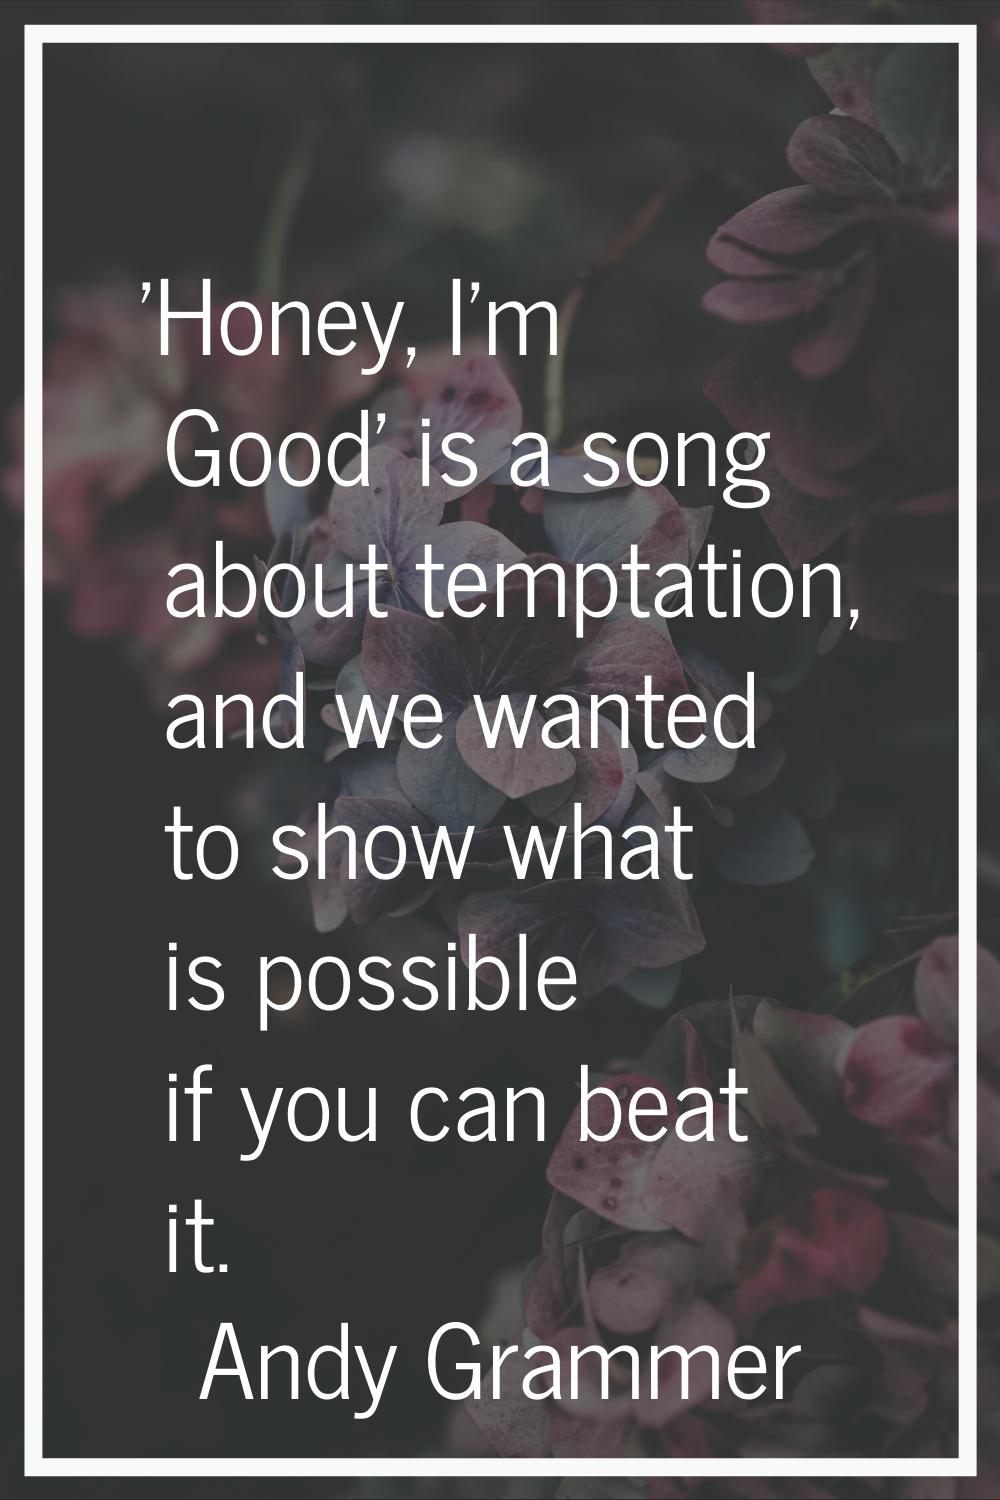 'Honey, I'm Good' is a song about temptation, and we wanted to show what is possible if you can bea